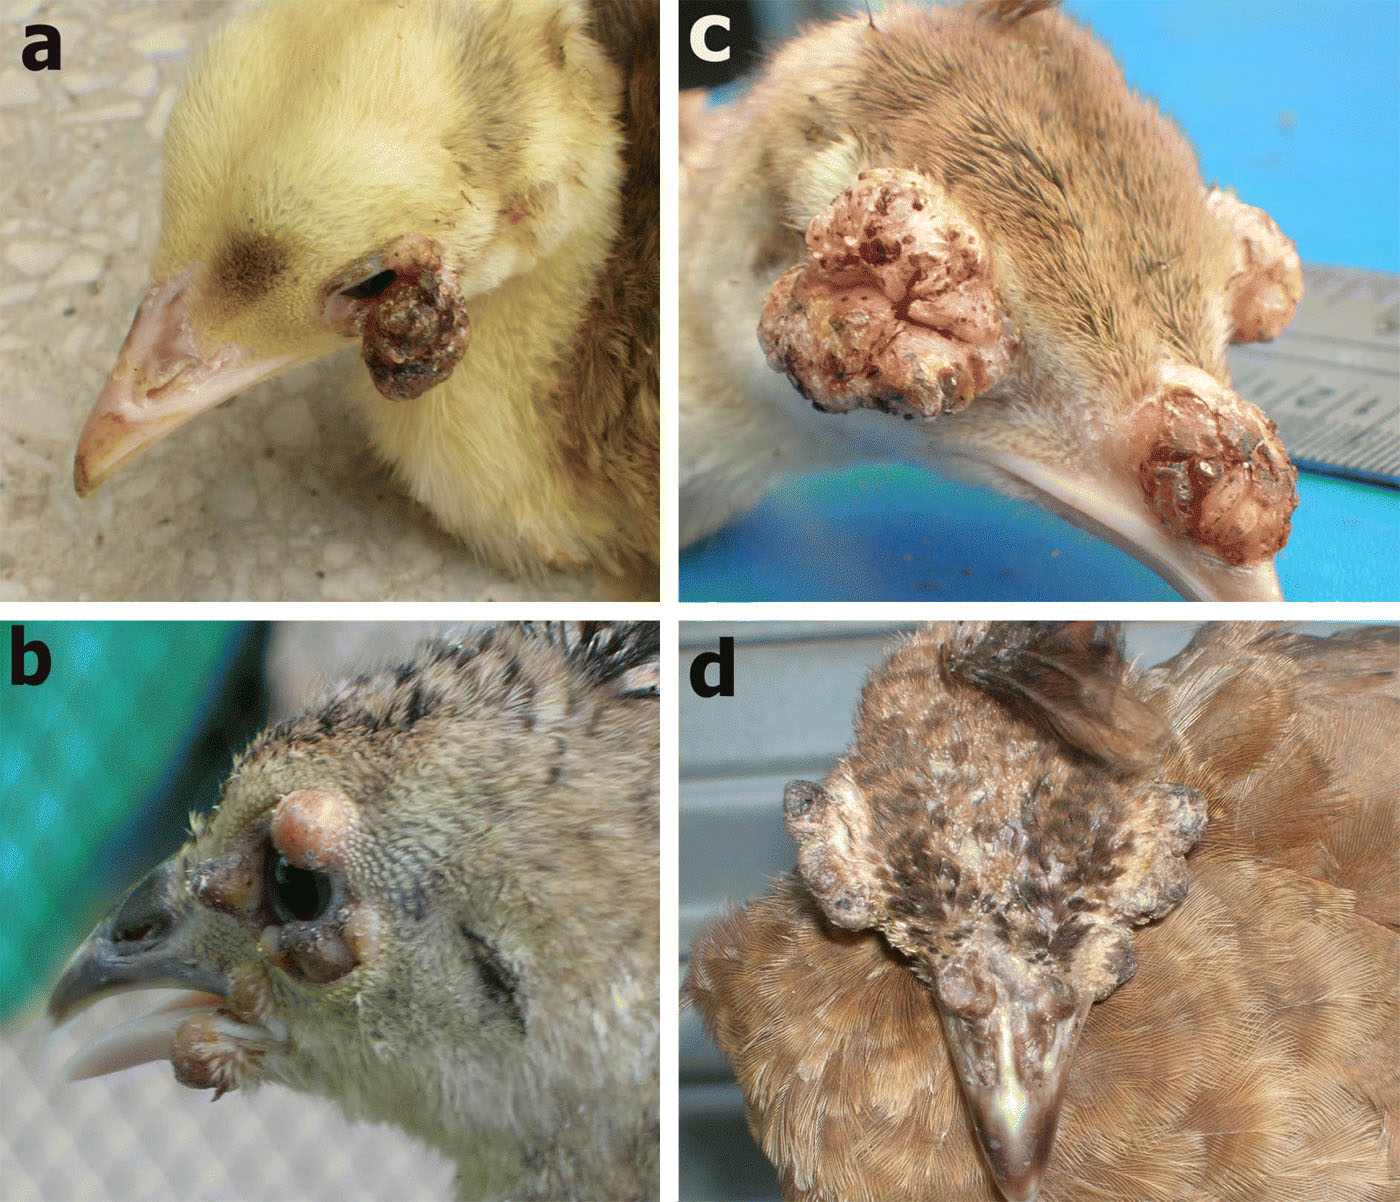 Figure 2.  Gross lesions of avian pox in peafowl chicks on the eye and beak. 2a: well developed lesions on the eye lid, eye is partially open. 2b: multiple nodular growth around the eye and also on the beak. 2c: note the cauliflower-like growth on the eye and beak. 2d: scar formation of the lesions on and around the eye and beak, still eyes are closed due to lesions.